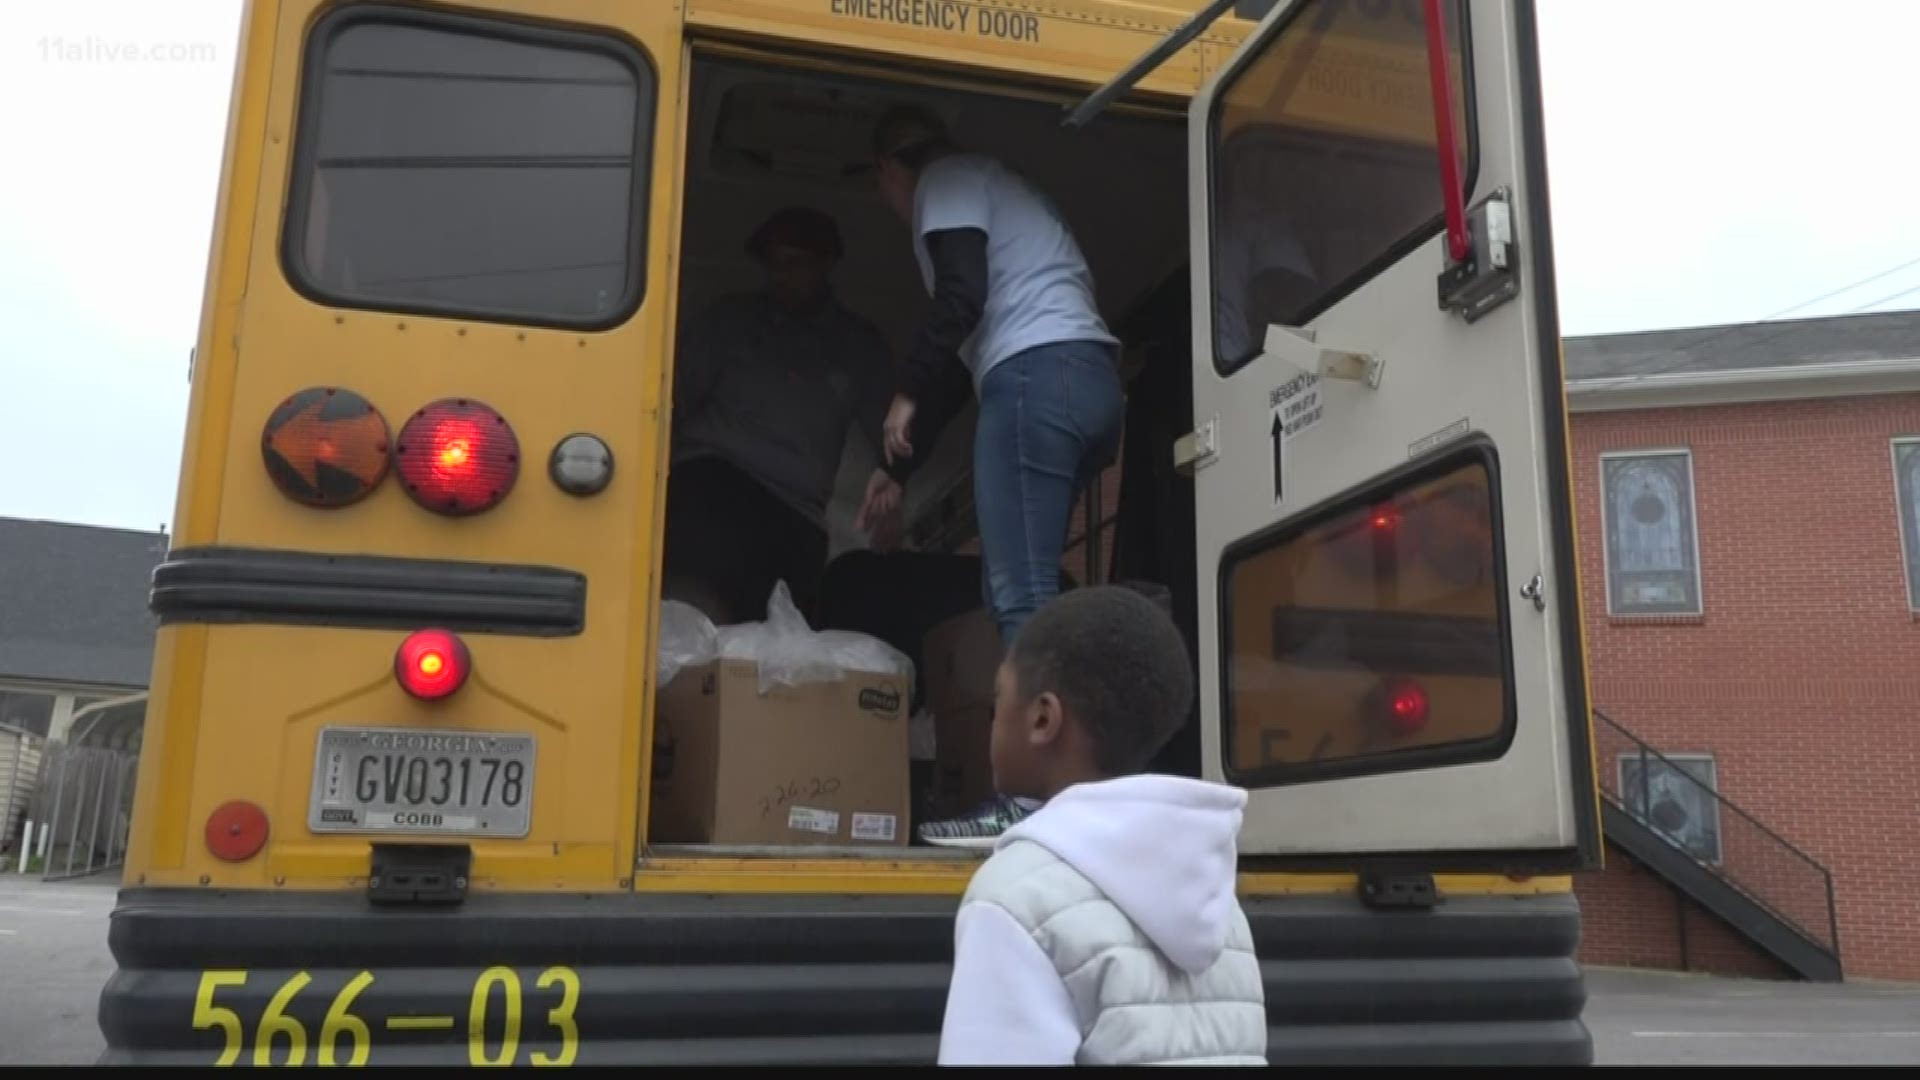 School districts across Metro Atlanta are figuring out the best way to support families and feed children during the extended coronavirus school closures.